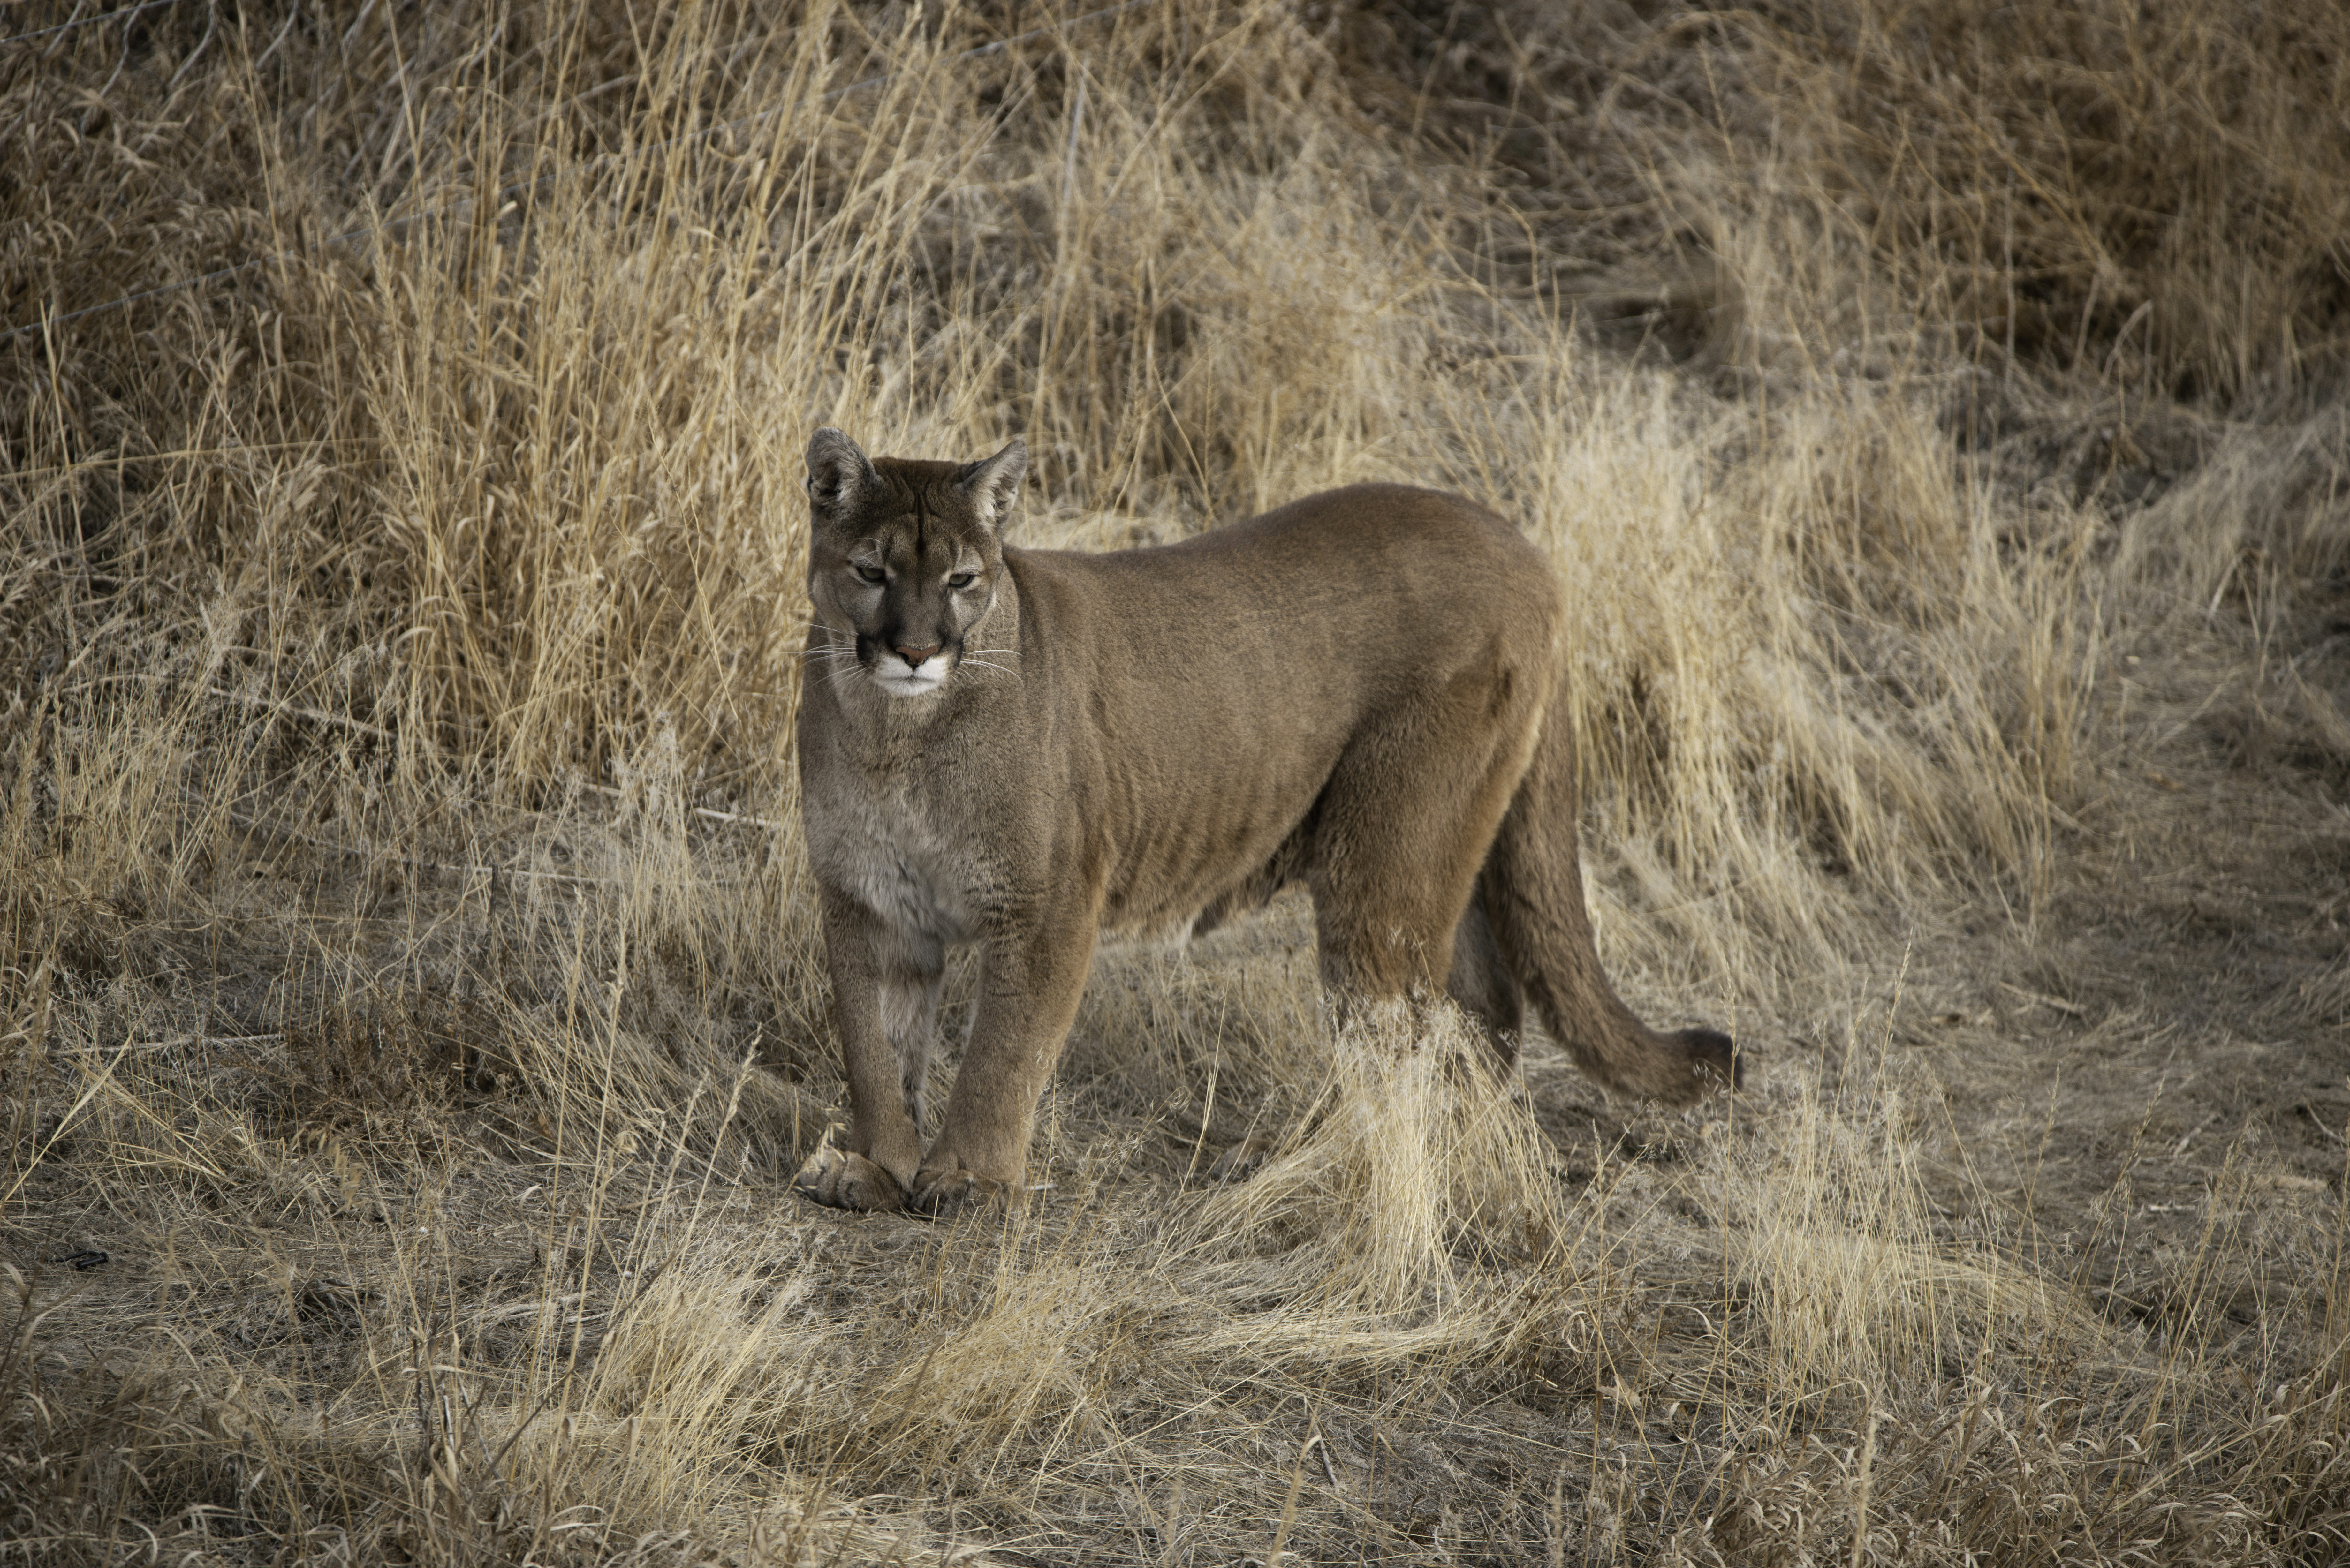 Cougars blend in well with their enviroment.